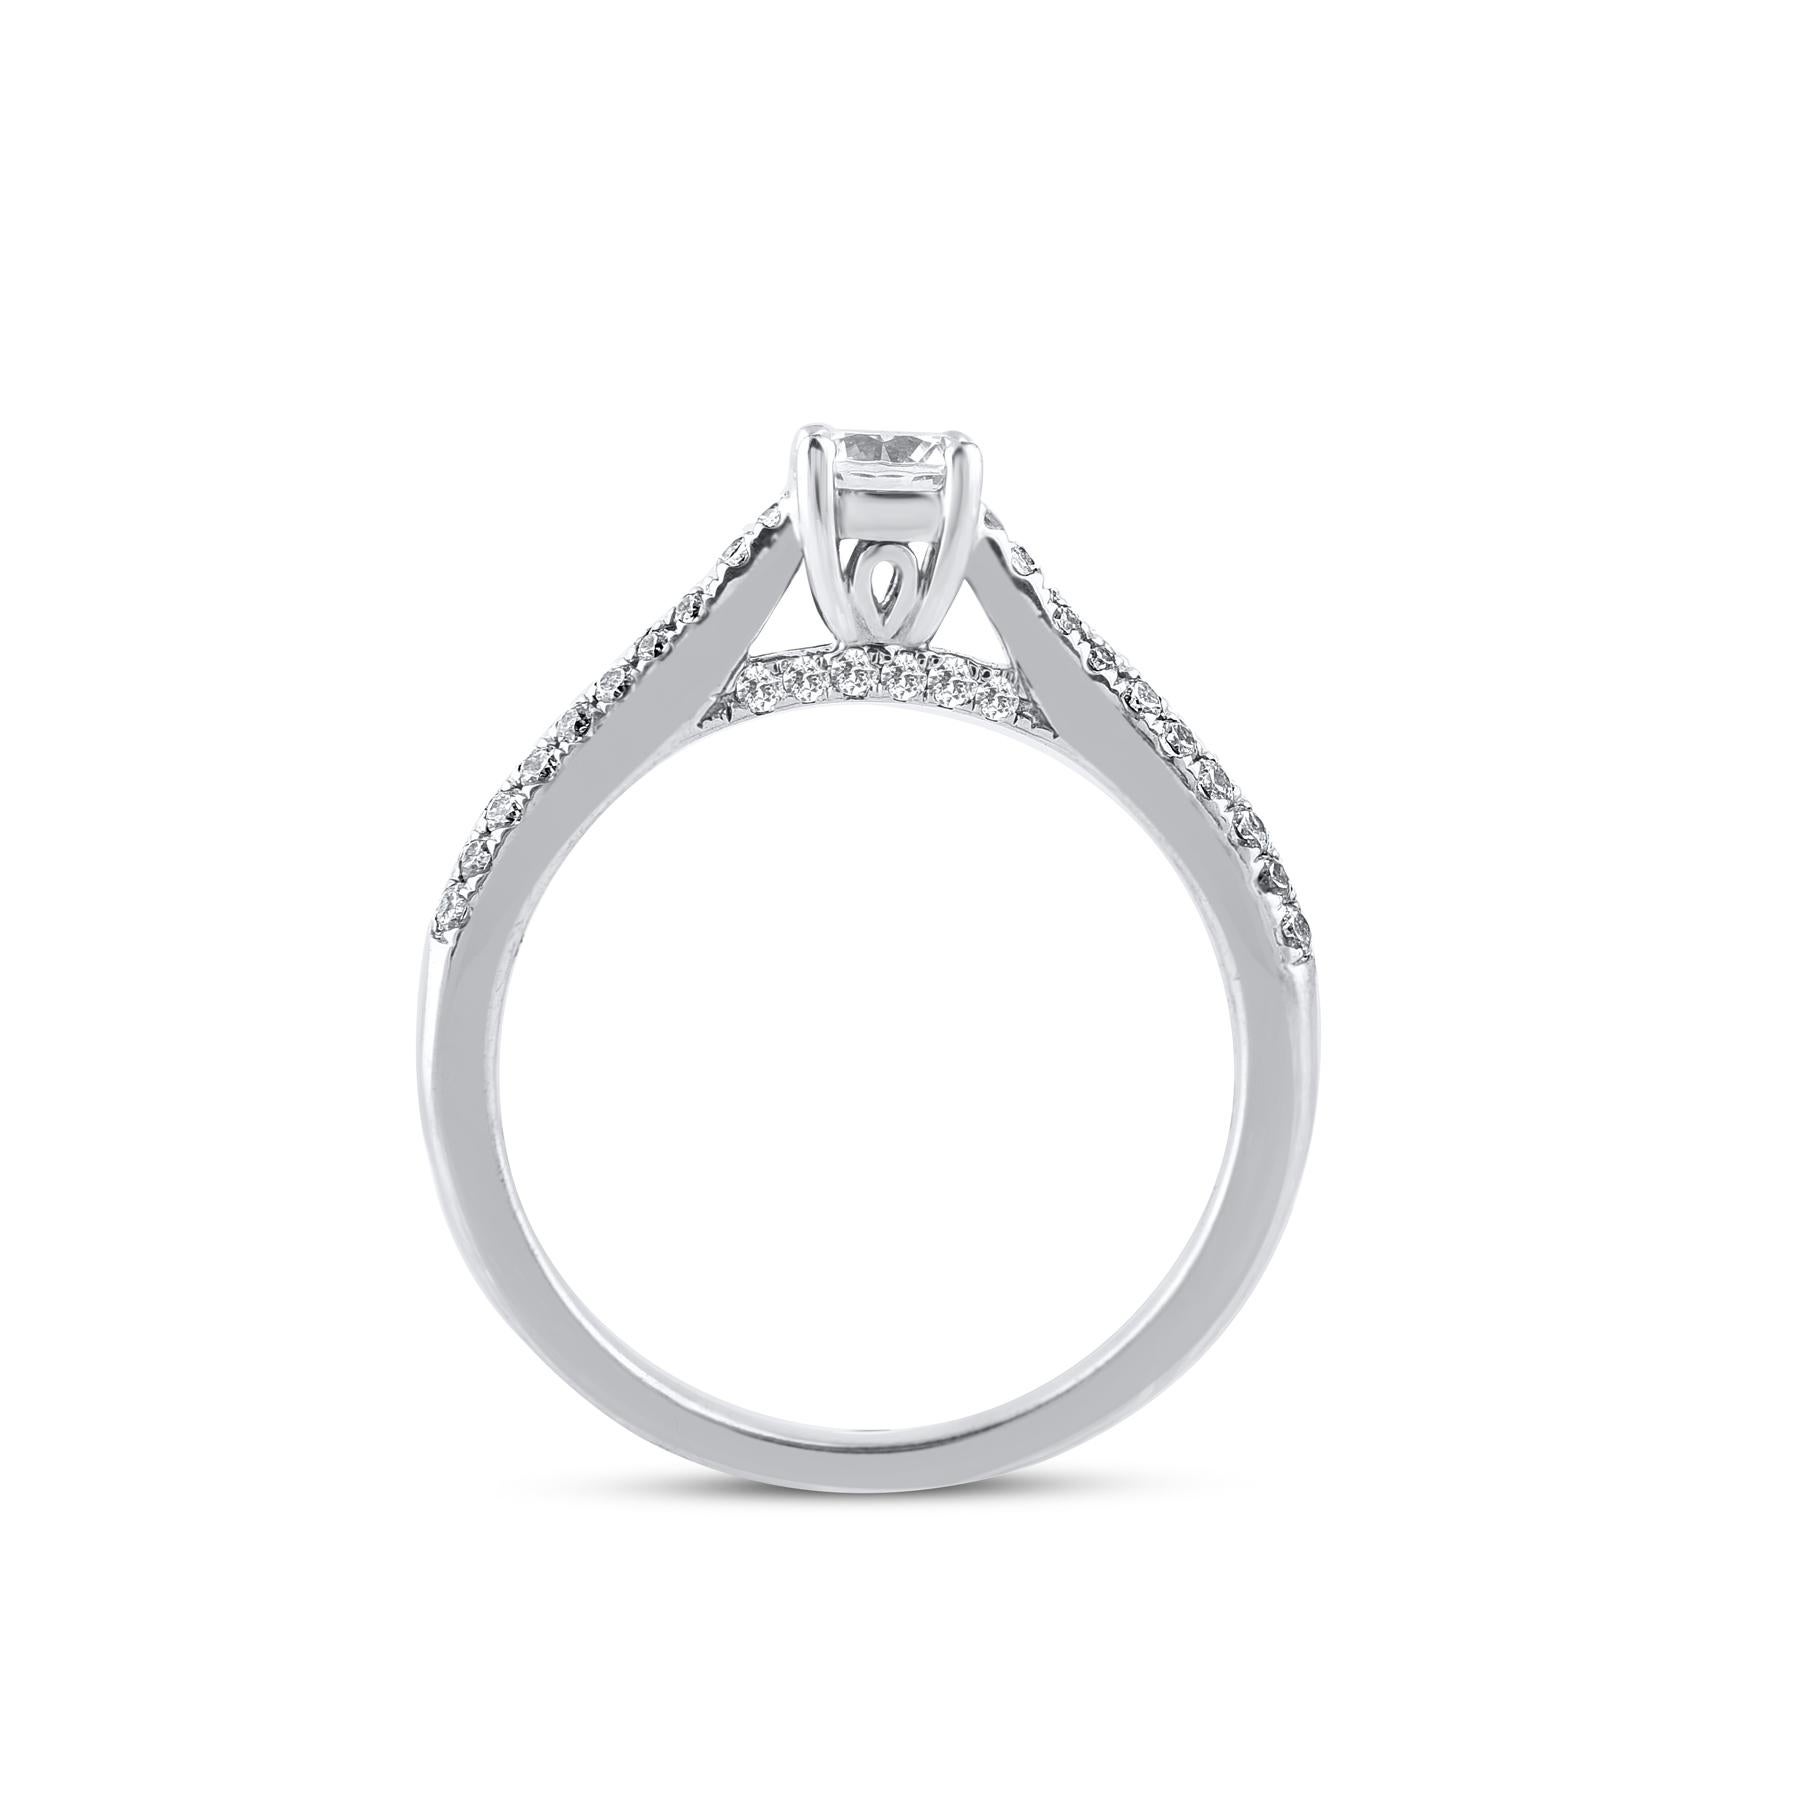 TJD 0.66 Carat Round Diamond 18K White Gold Engagement Ring with Shoulder Stones In New Condition For Sale In New York, NY